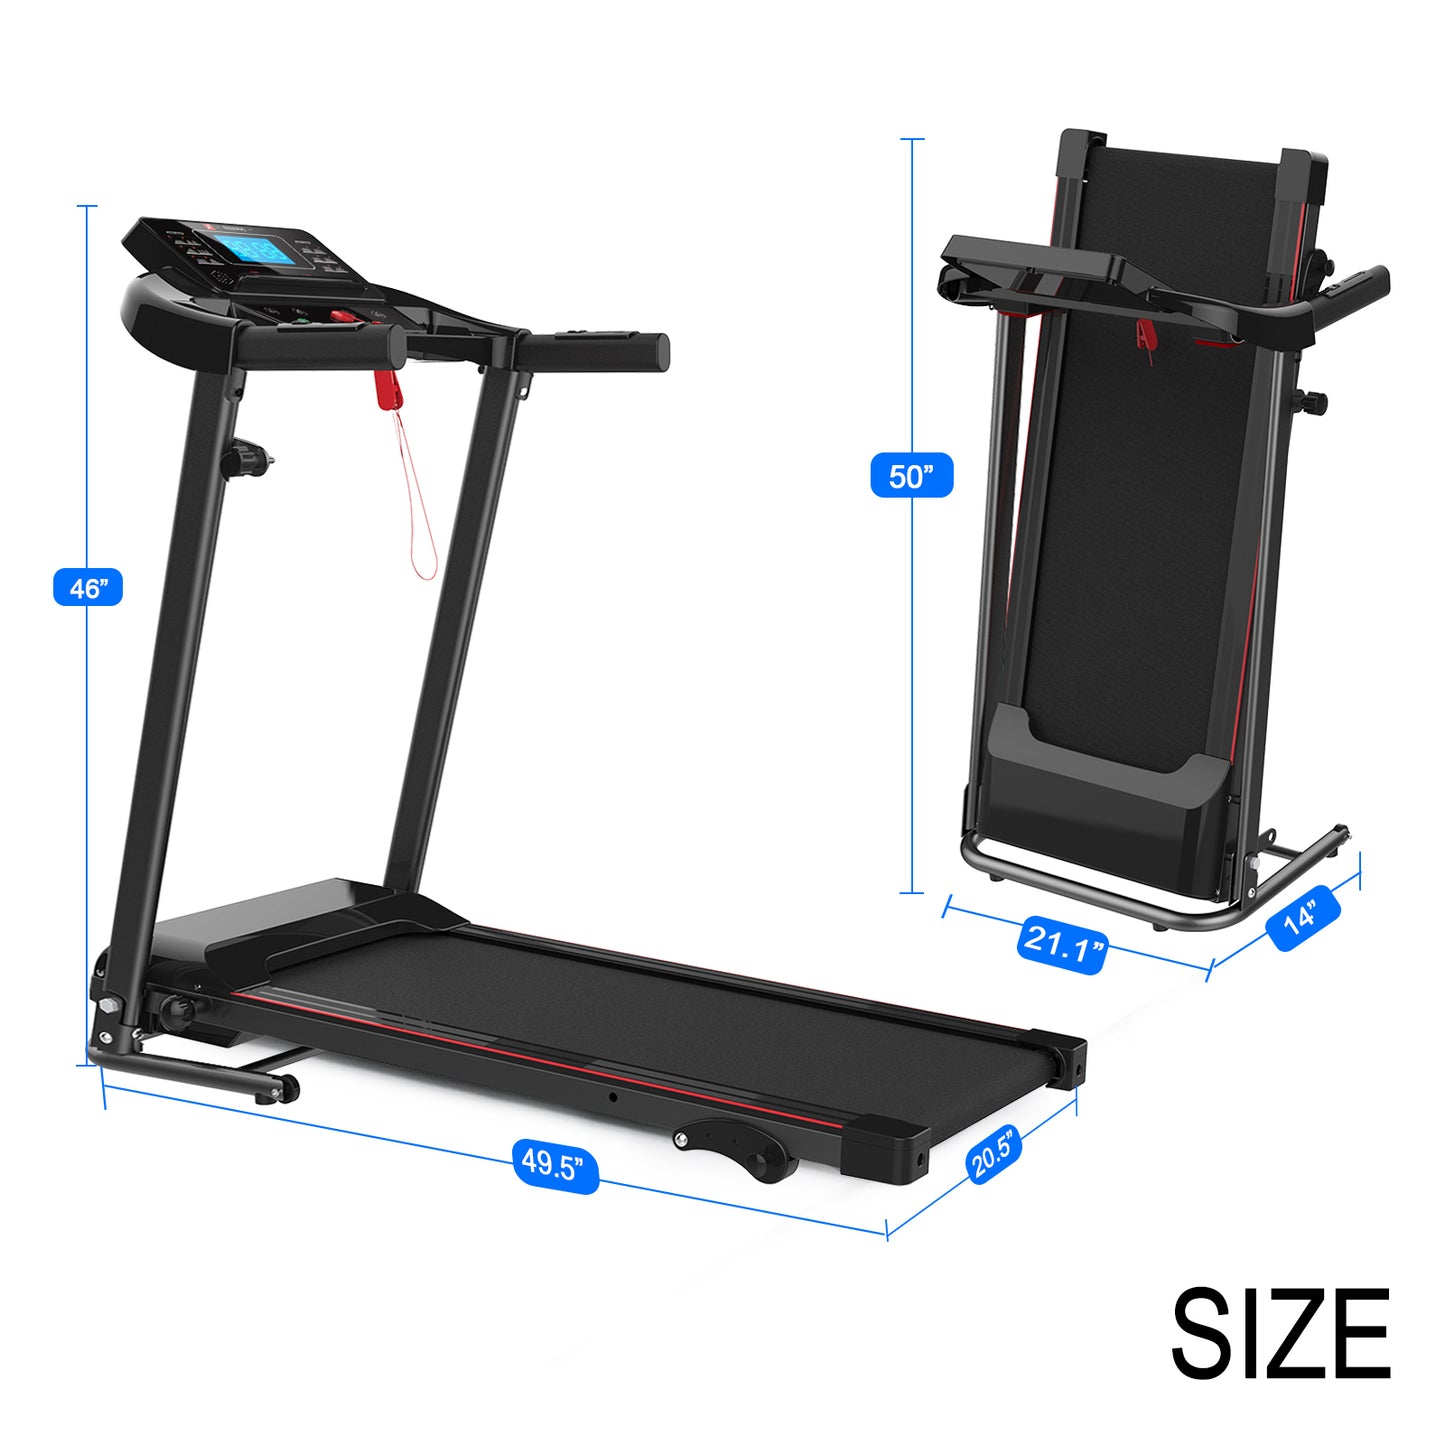 Folding Treadmill with Manual Incline, Fitness Workout Exercise Machine w/Wireless Bluetooth Speakers, LCD Screen, Shock-Absorbent Running Deck, Device Holder - Black